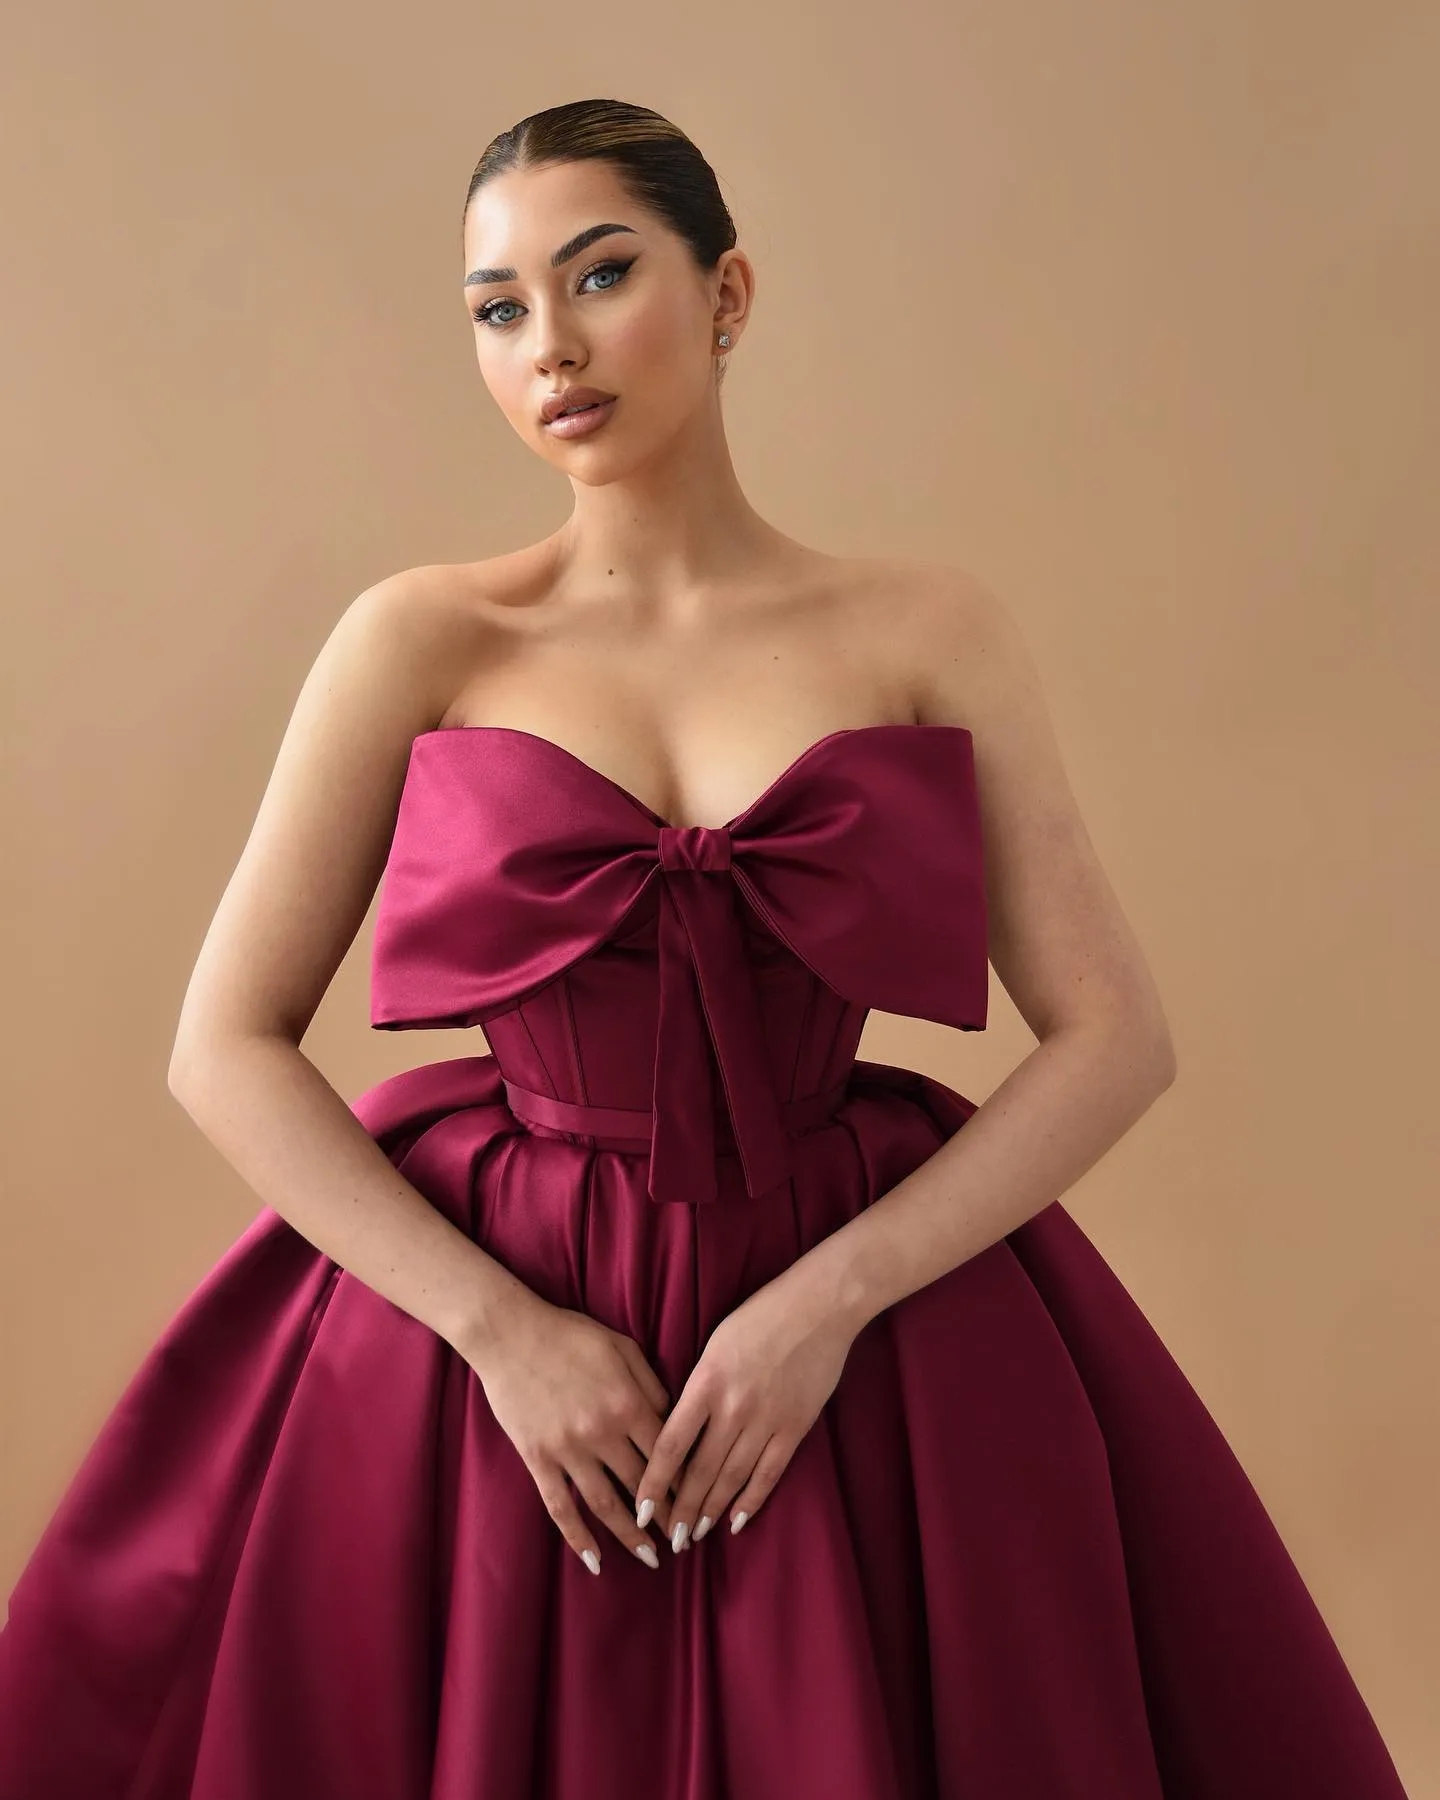 Fashion Burgundy Prom Dresses Bow Knot Neck Evening Gowns Ruffles Tea Length Formal Red Carpet Special Occasion Party dress YD